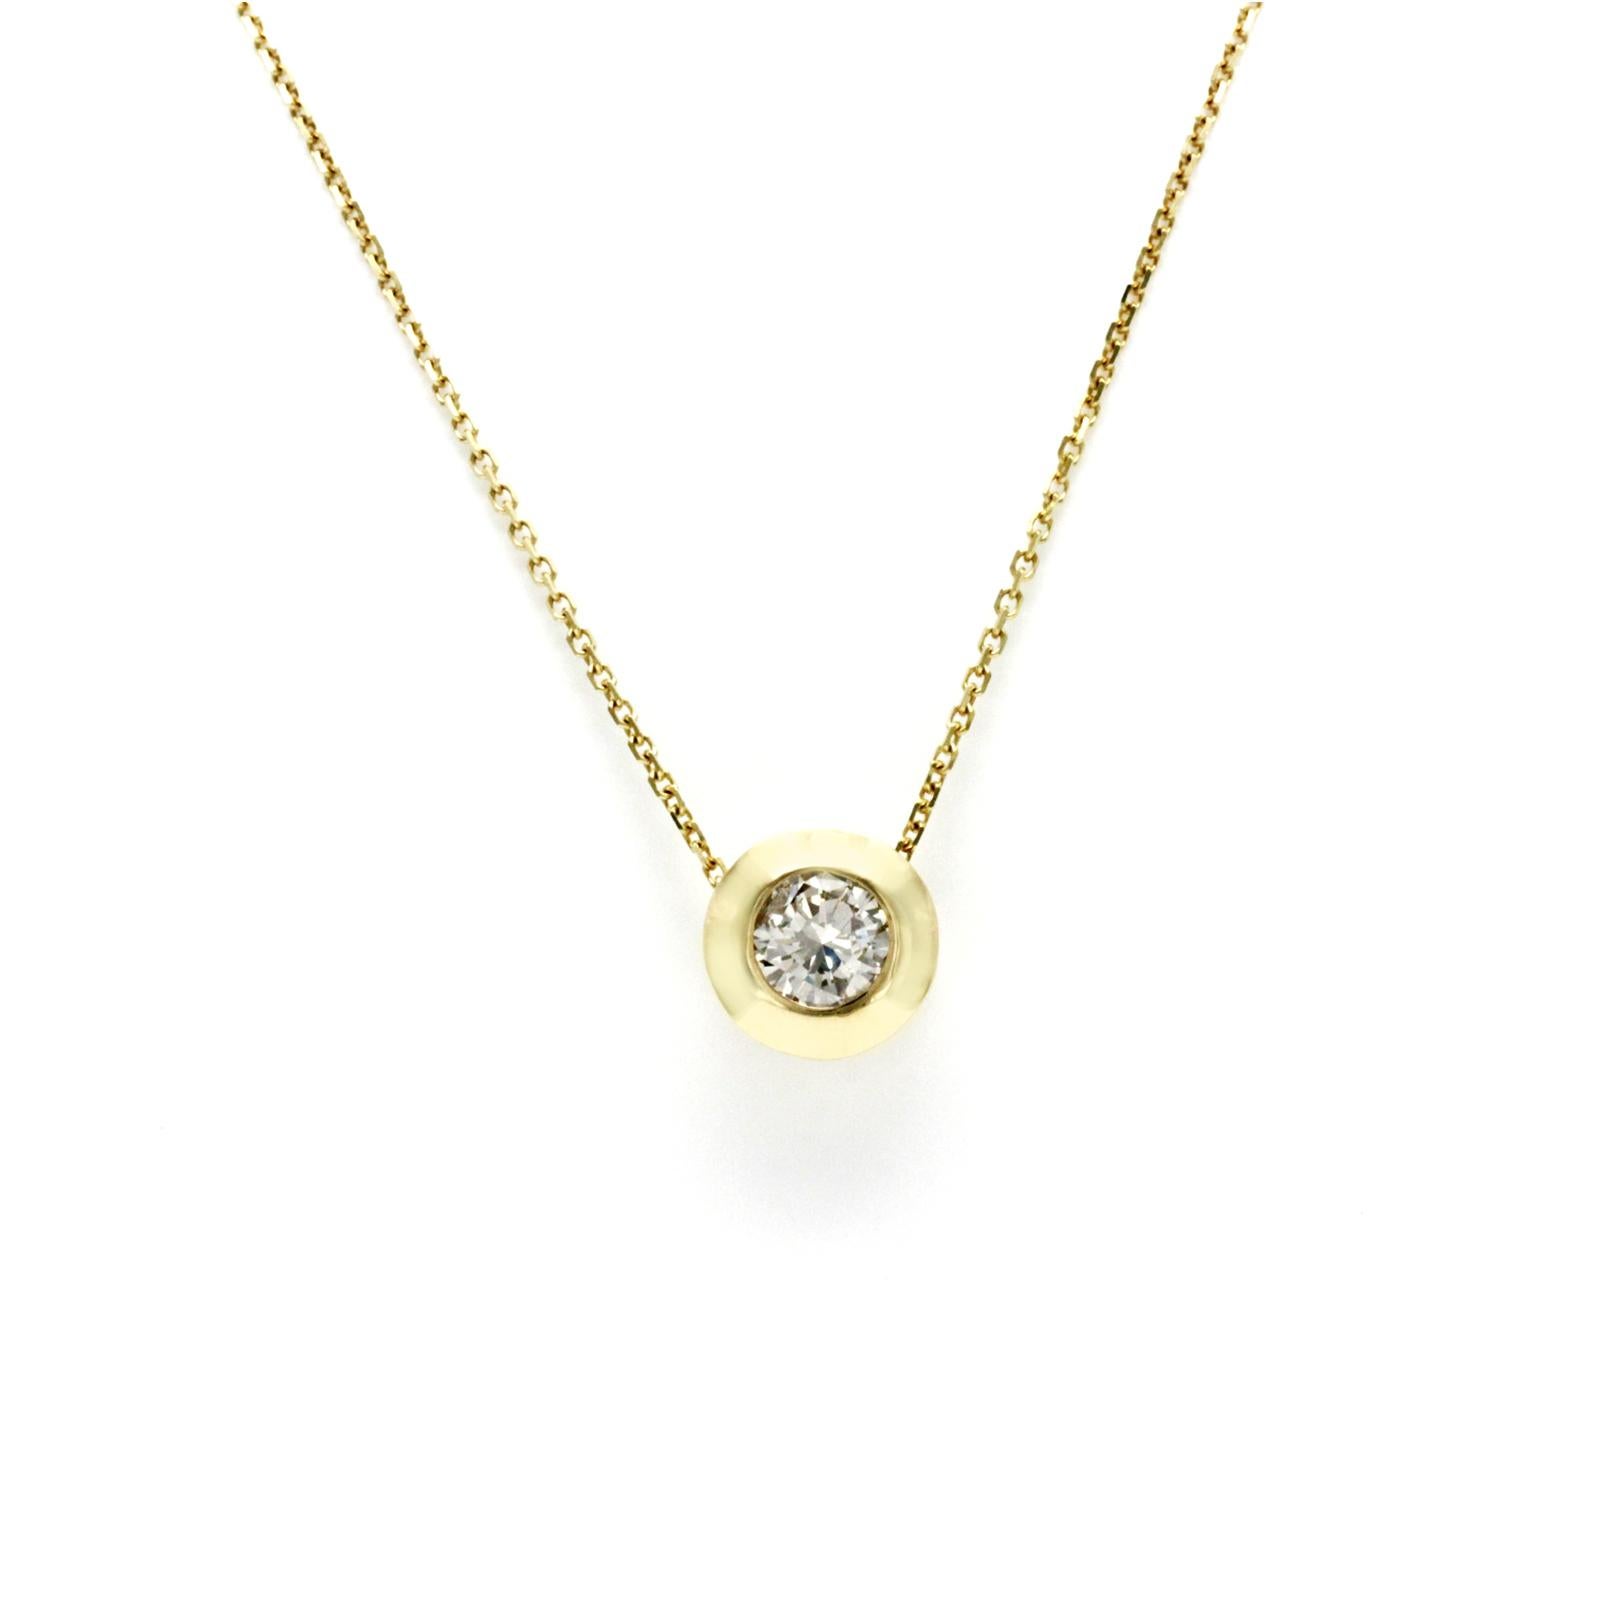 100% Authentic, 100% Customer Satisfaction
Pendant: 9 mm
Chain: 0.6 mm
Size: 18 Inches
Metal: 14K Yellow Gold
Hallmarks: 14K
Total Weight: 2.7 Grams
Stone Type: 0.40 CT Diamond Color H-L Clarity SI-I1
Condition: New  